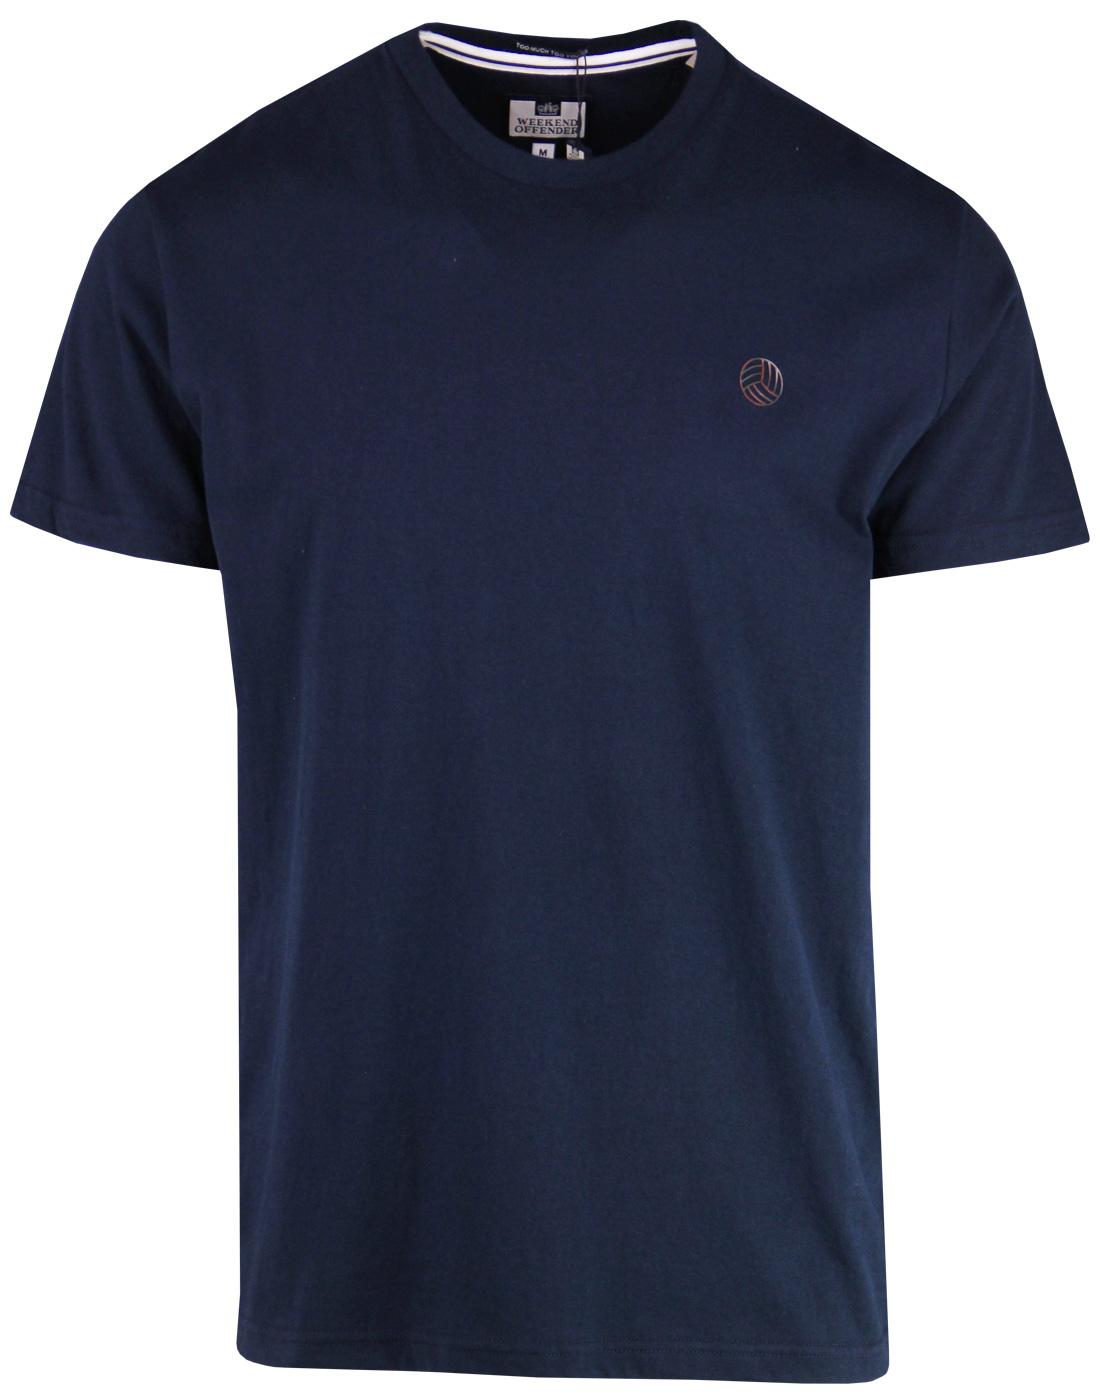 WEEKEND OFFENDER Shelley Retro AMF Football Tee Navy